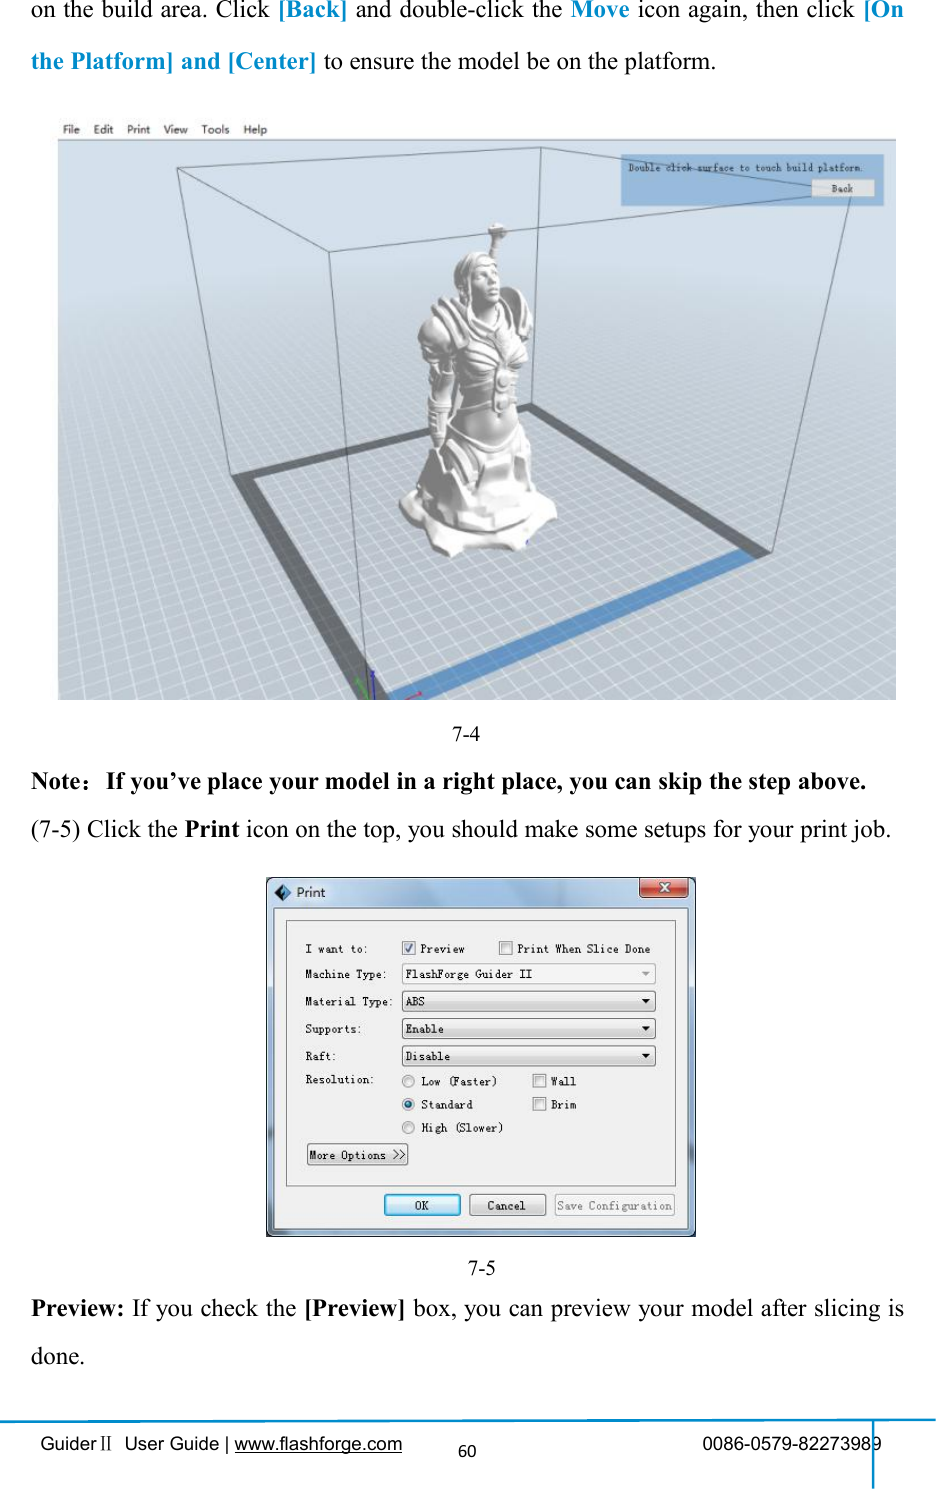 GuiderⅡUser Guide | www.flashforge.com 0086-0579-8227398960on the build area. Click [Back] and double-click the Move icon again, then click [Onthe Platform] and [Center] to ensure the model be on the platform.7-4Note：If you’ve place your model in a right place, you can skip the step above.(7-5) Click the Print icon on the top, you should make some setups for your print job.Preview: If you check the [Preview] box, you can preview your model after slicing isdone.7-5